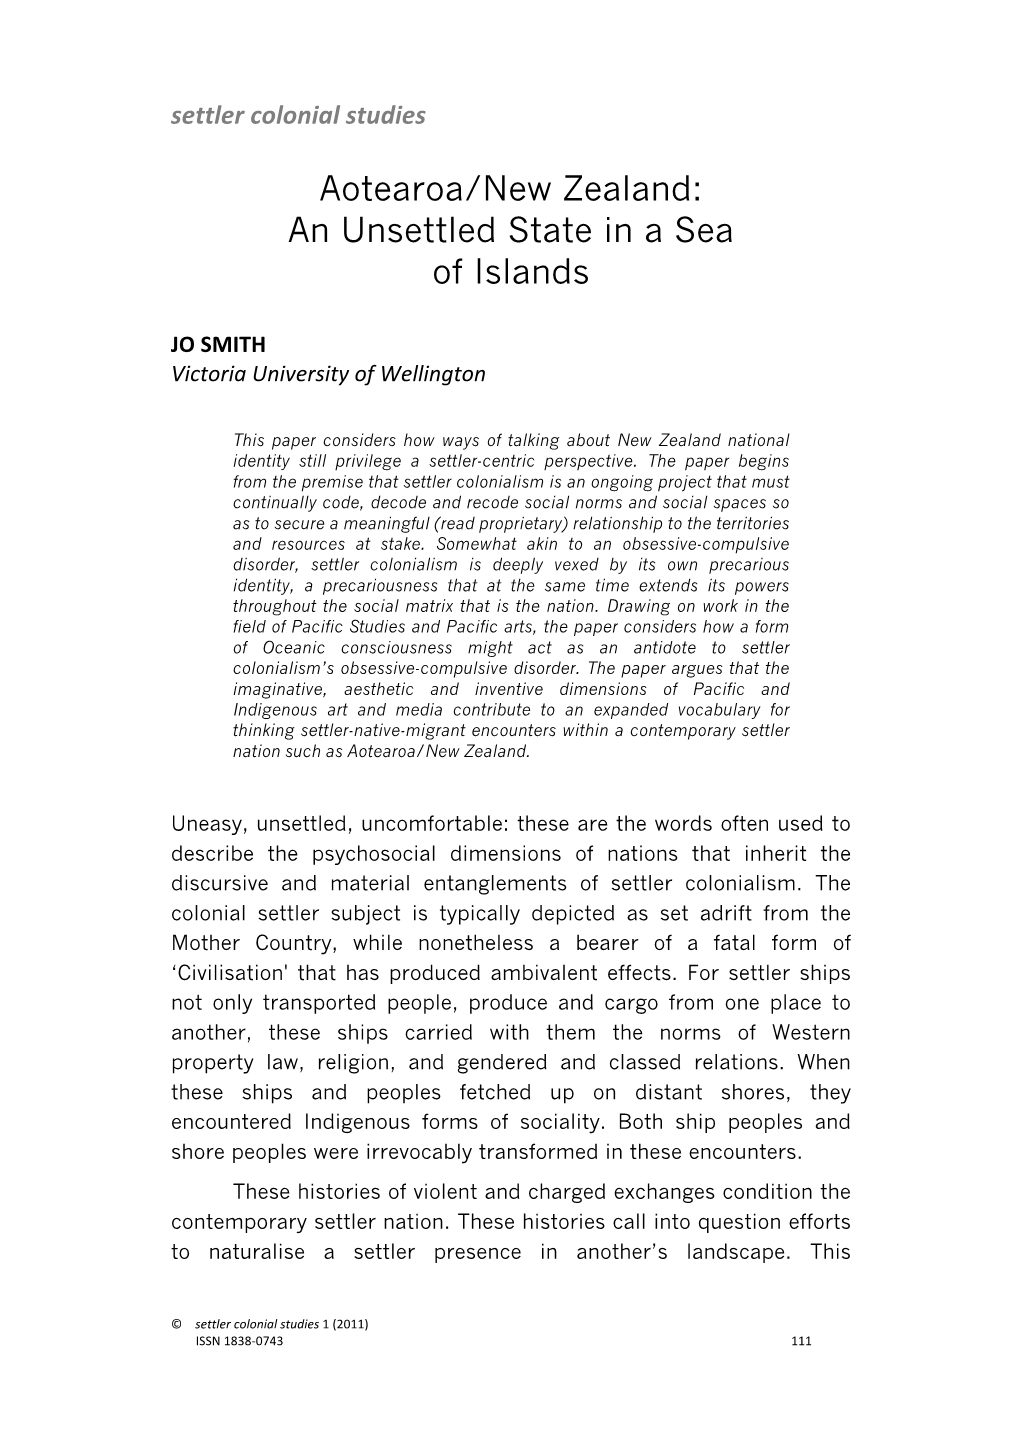 Aotearoa/New Zealand: an Unsettled State in a Sea of Islands